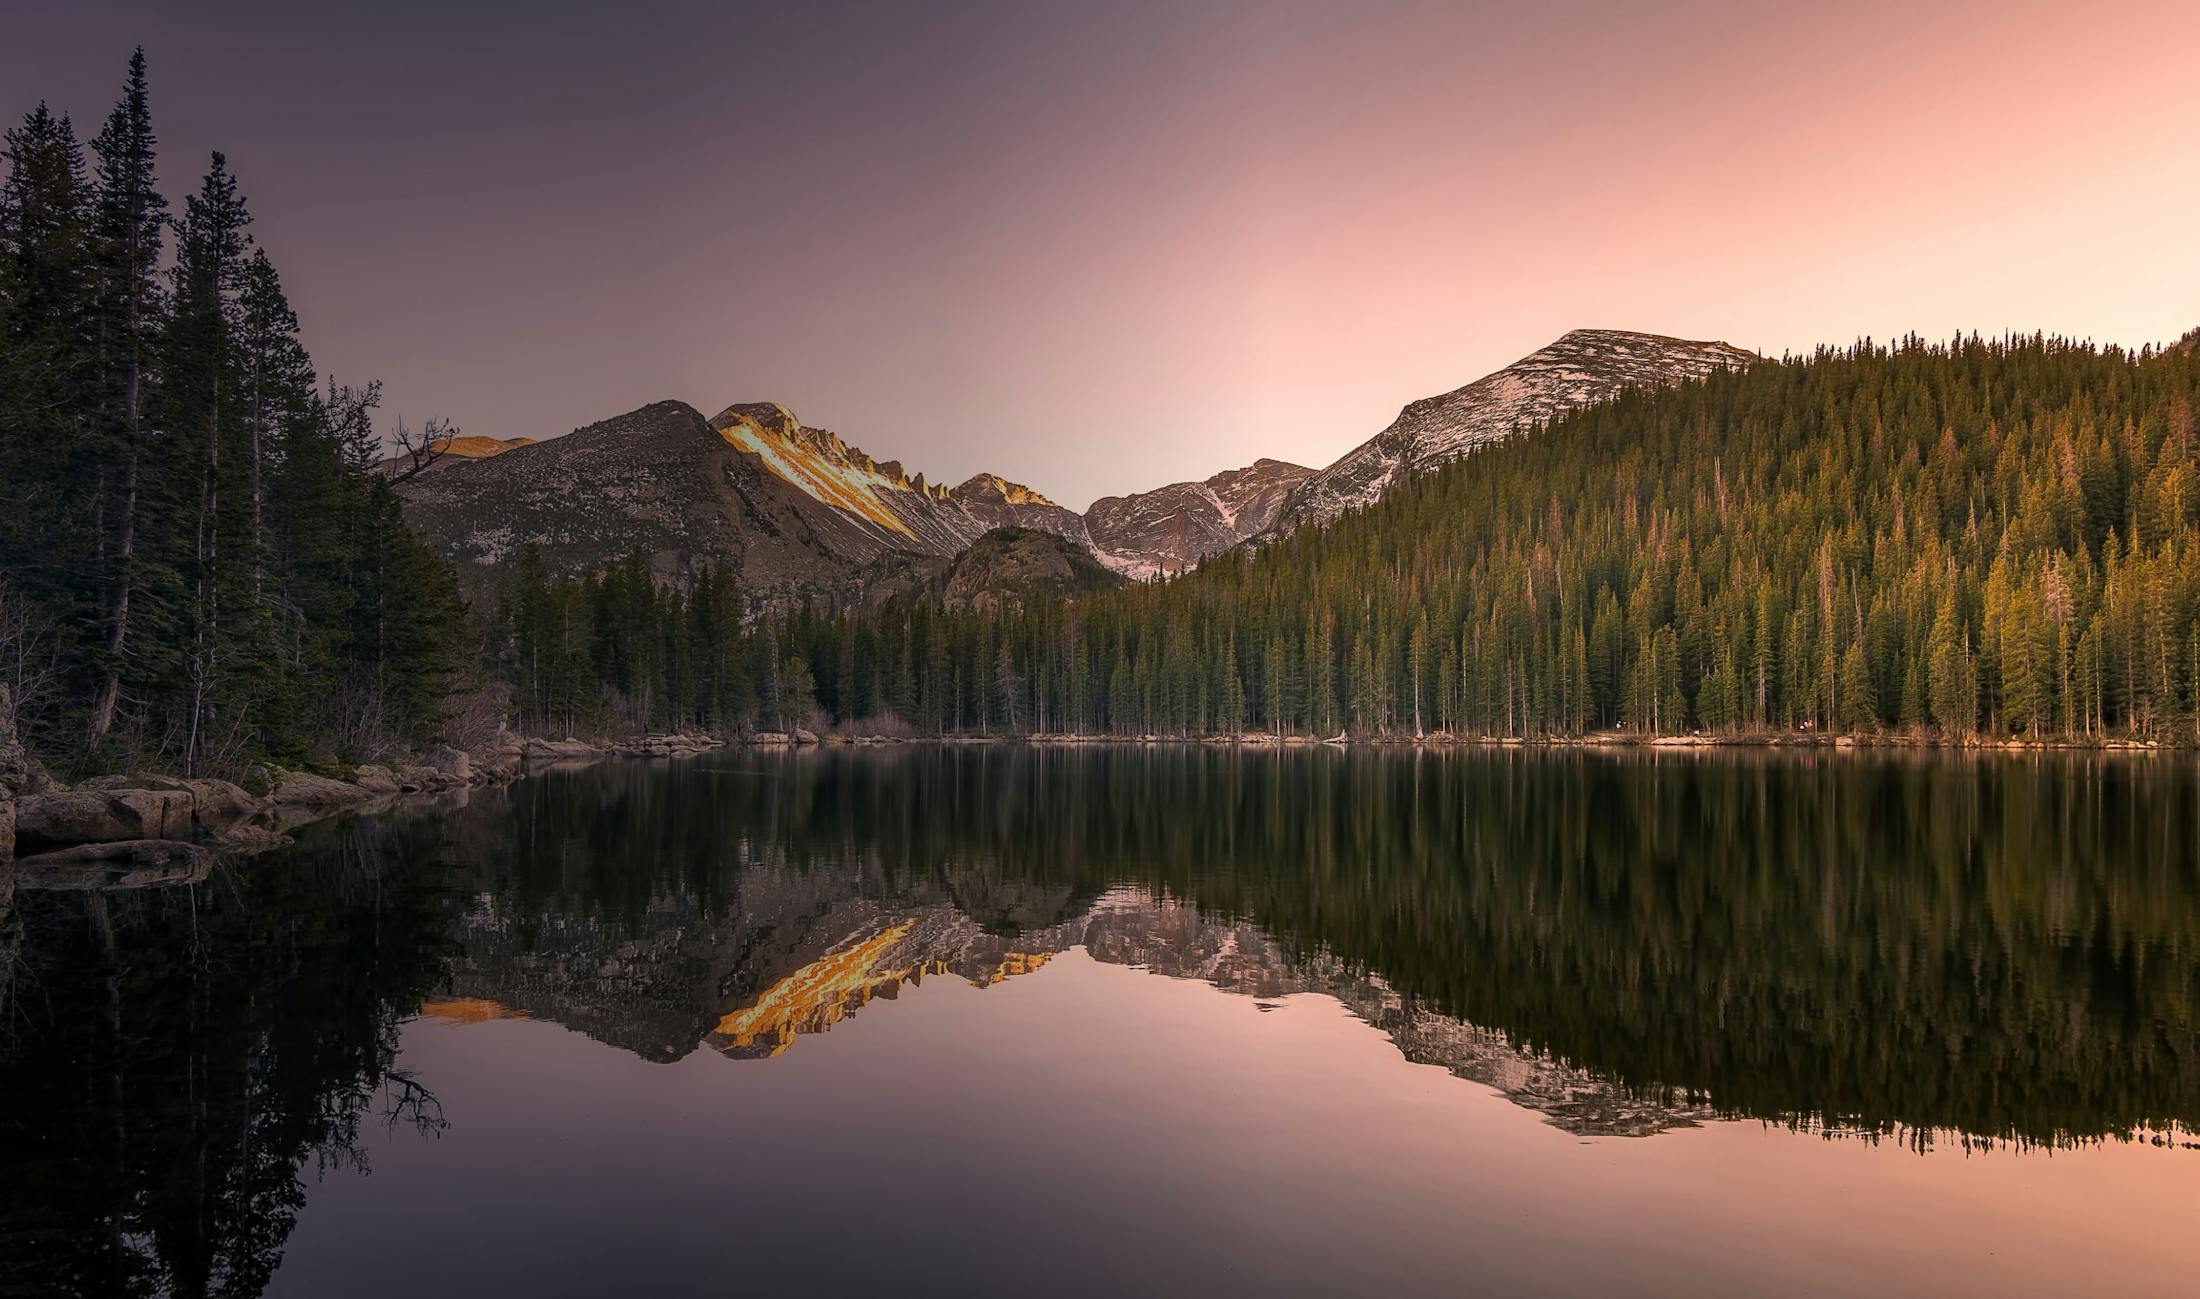 mountains reflected in a lake at sunset with a pink sky